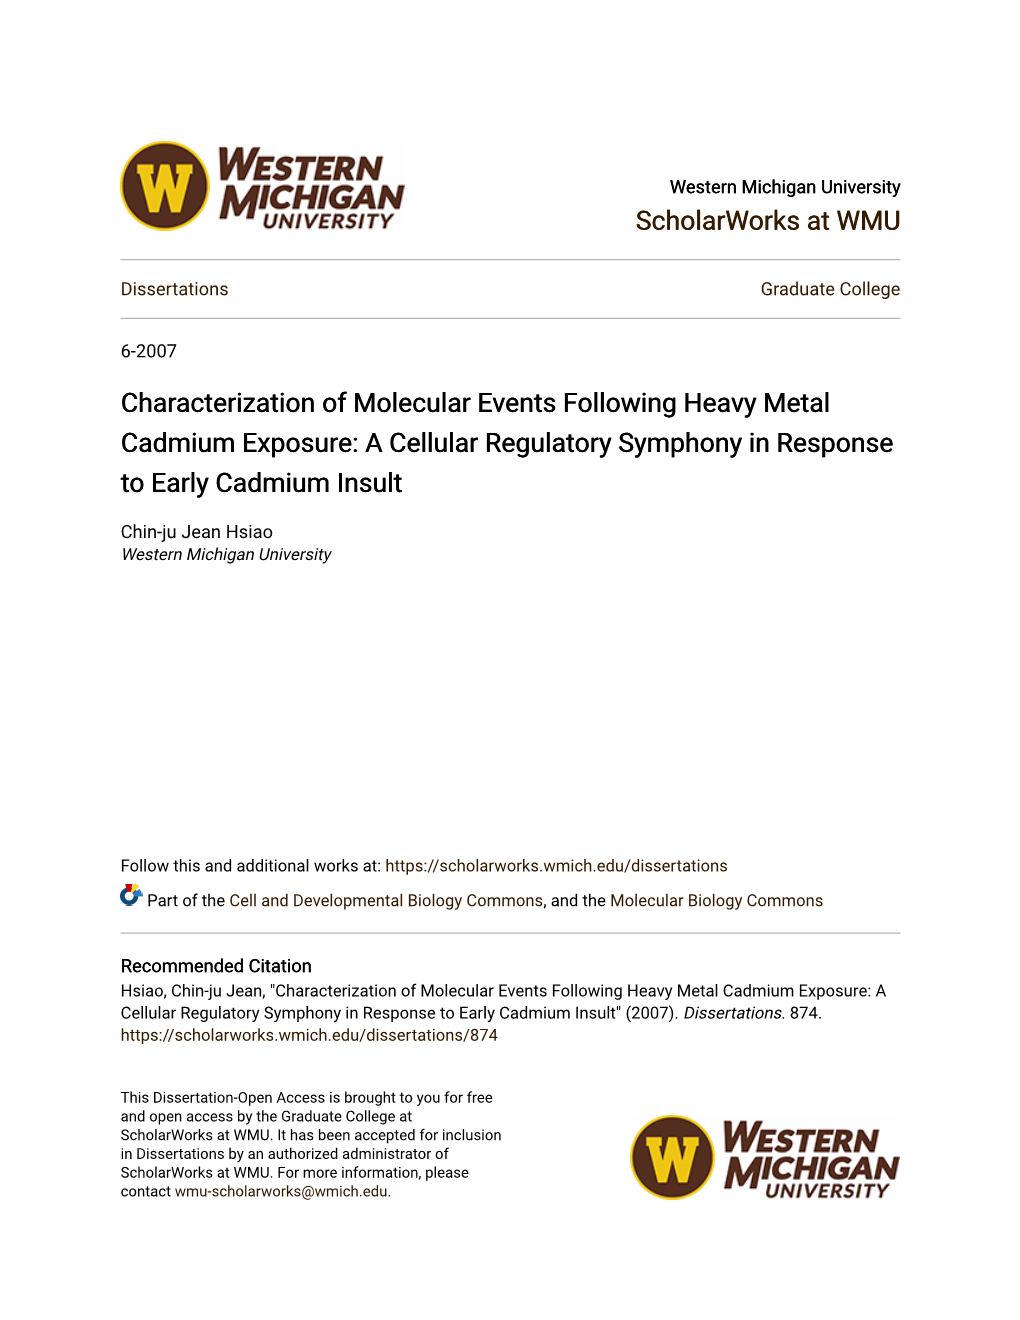 Characterization of Molecular Events Following Heavy Metal Cadmium Exposure: a Cellular Regulatory Symphony in Response to Early Cadmium Insult